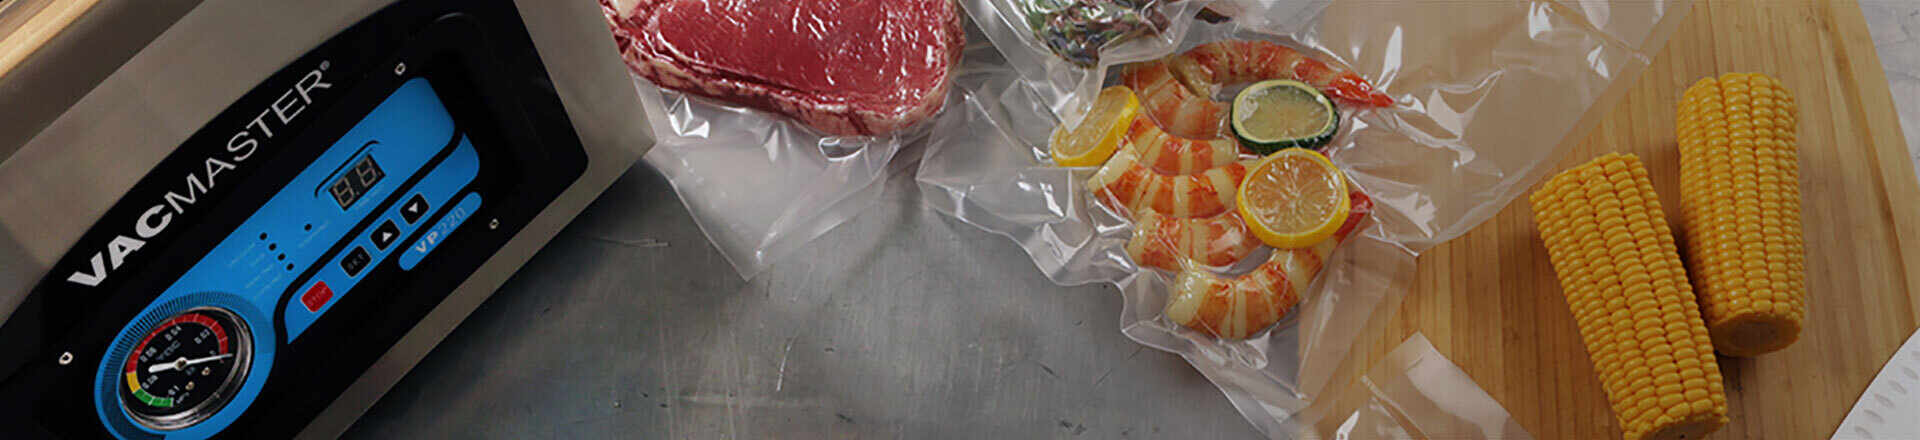 VacMaster® VP600 Commercial Double Chamber Vacuum Sealer